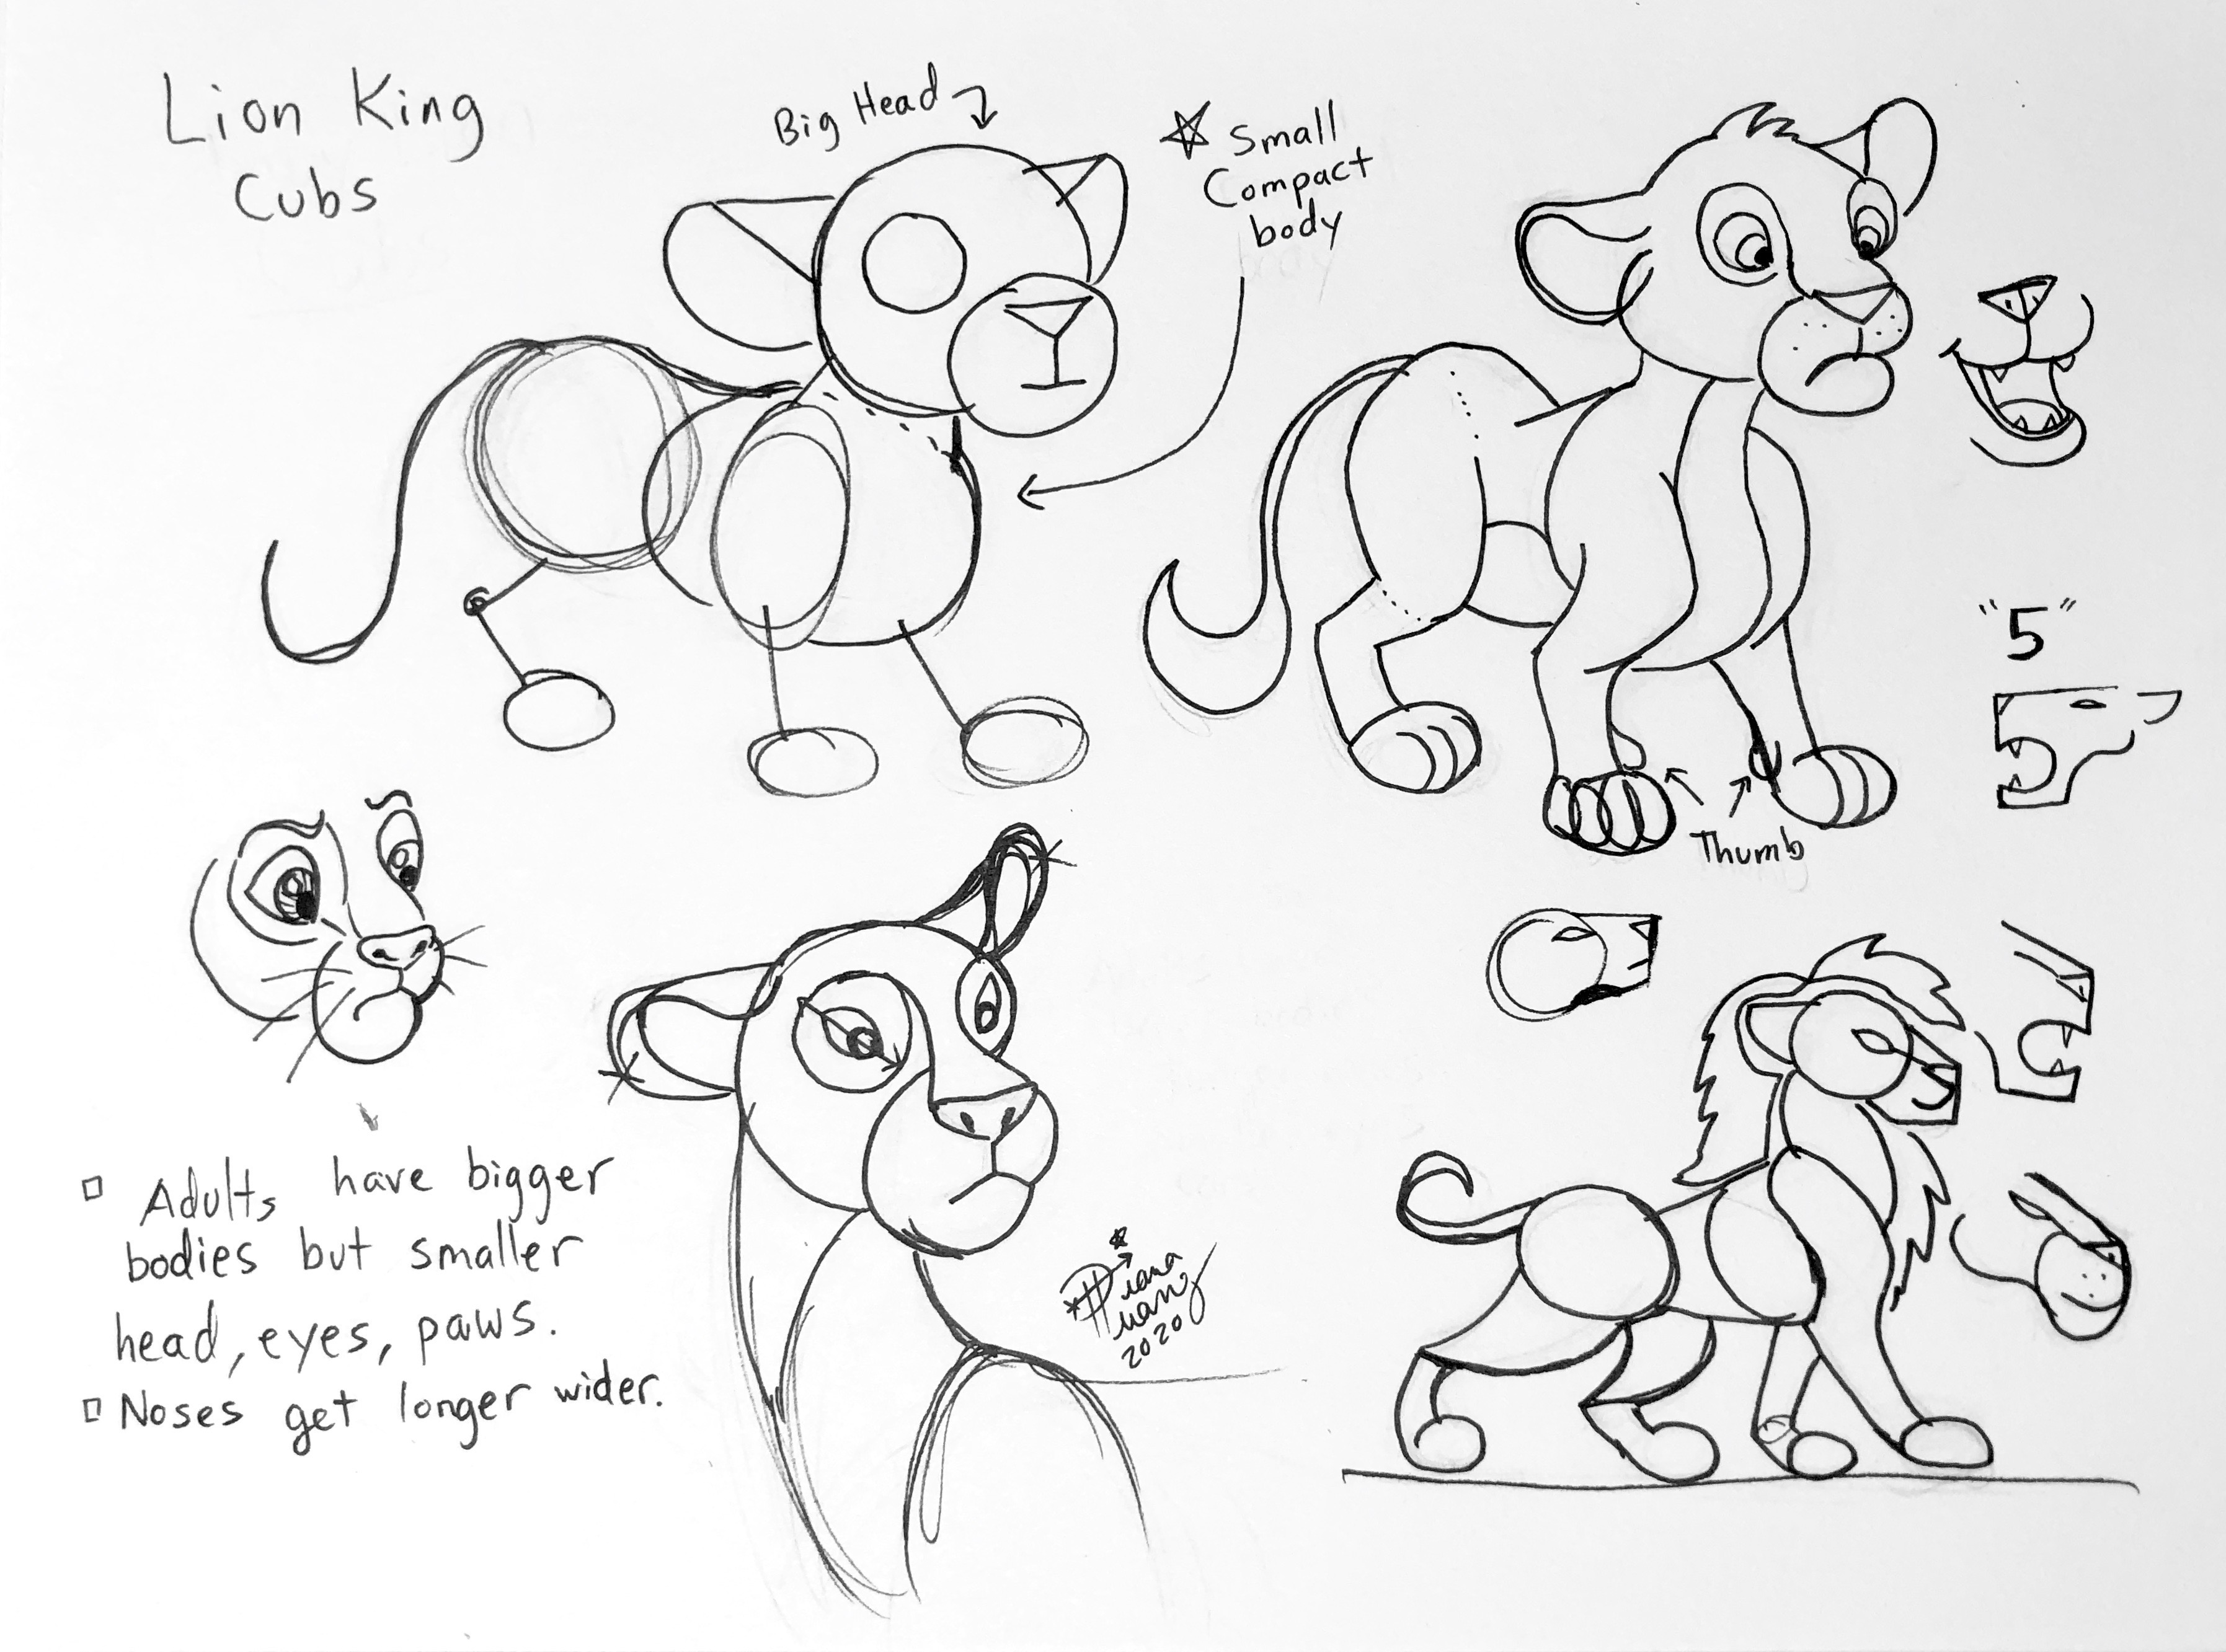 Draw King Cubs by on